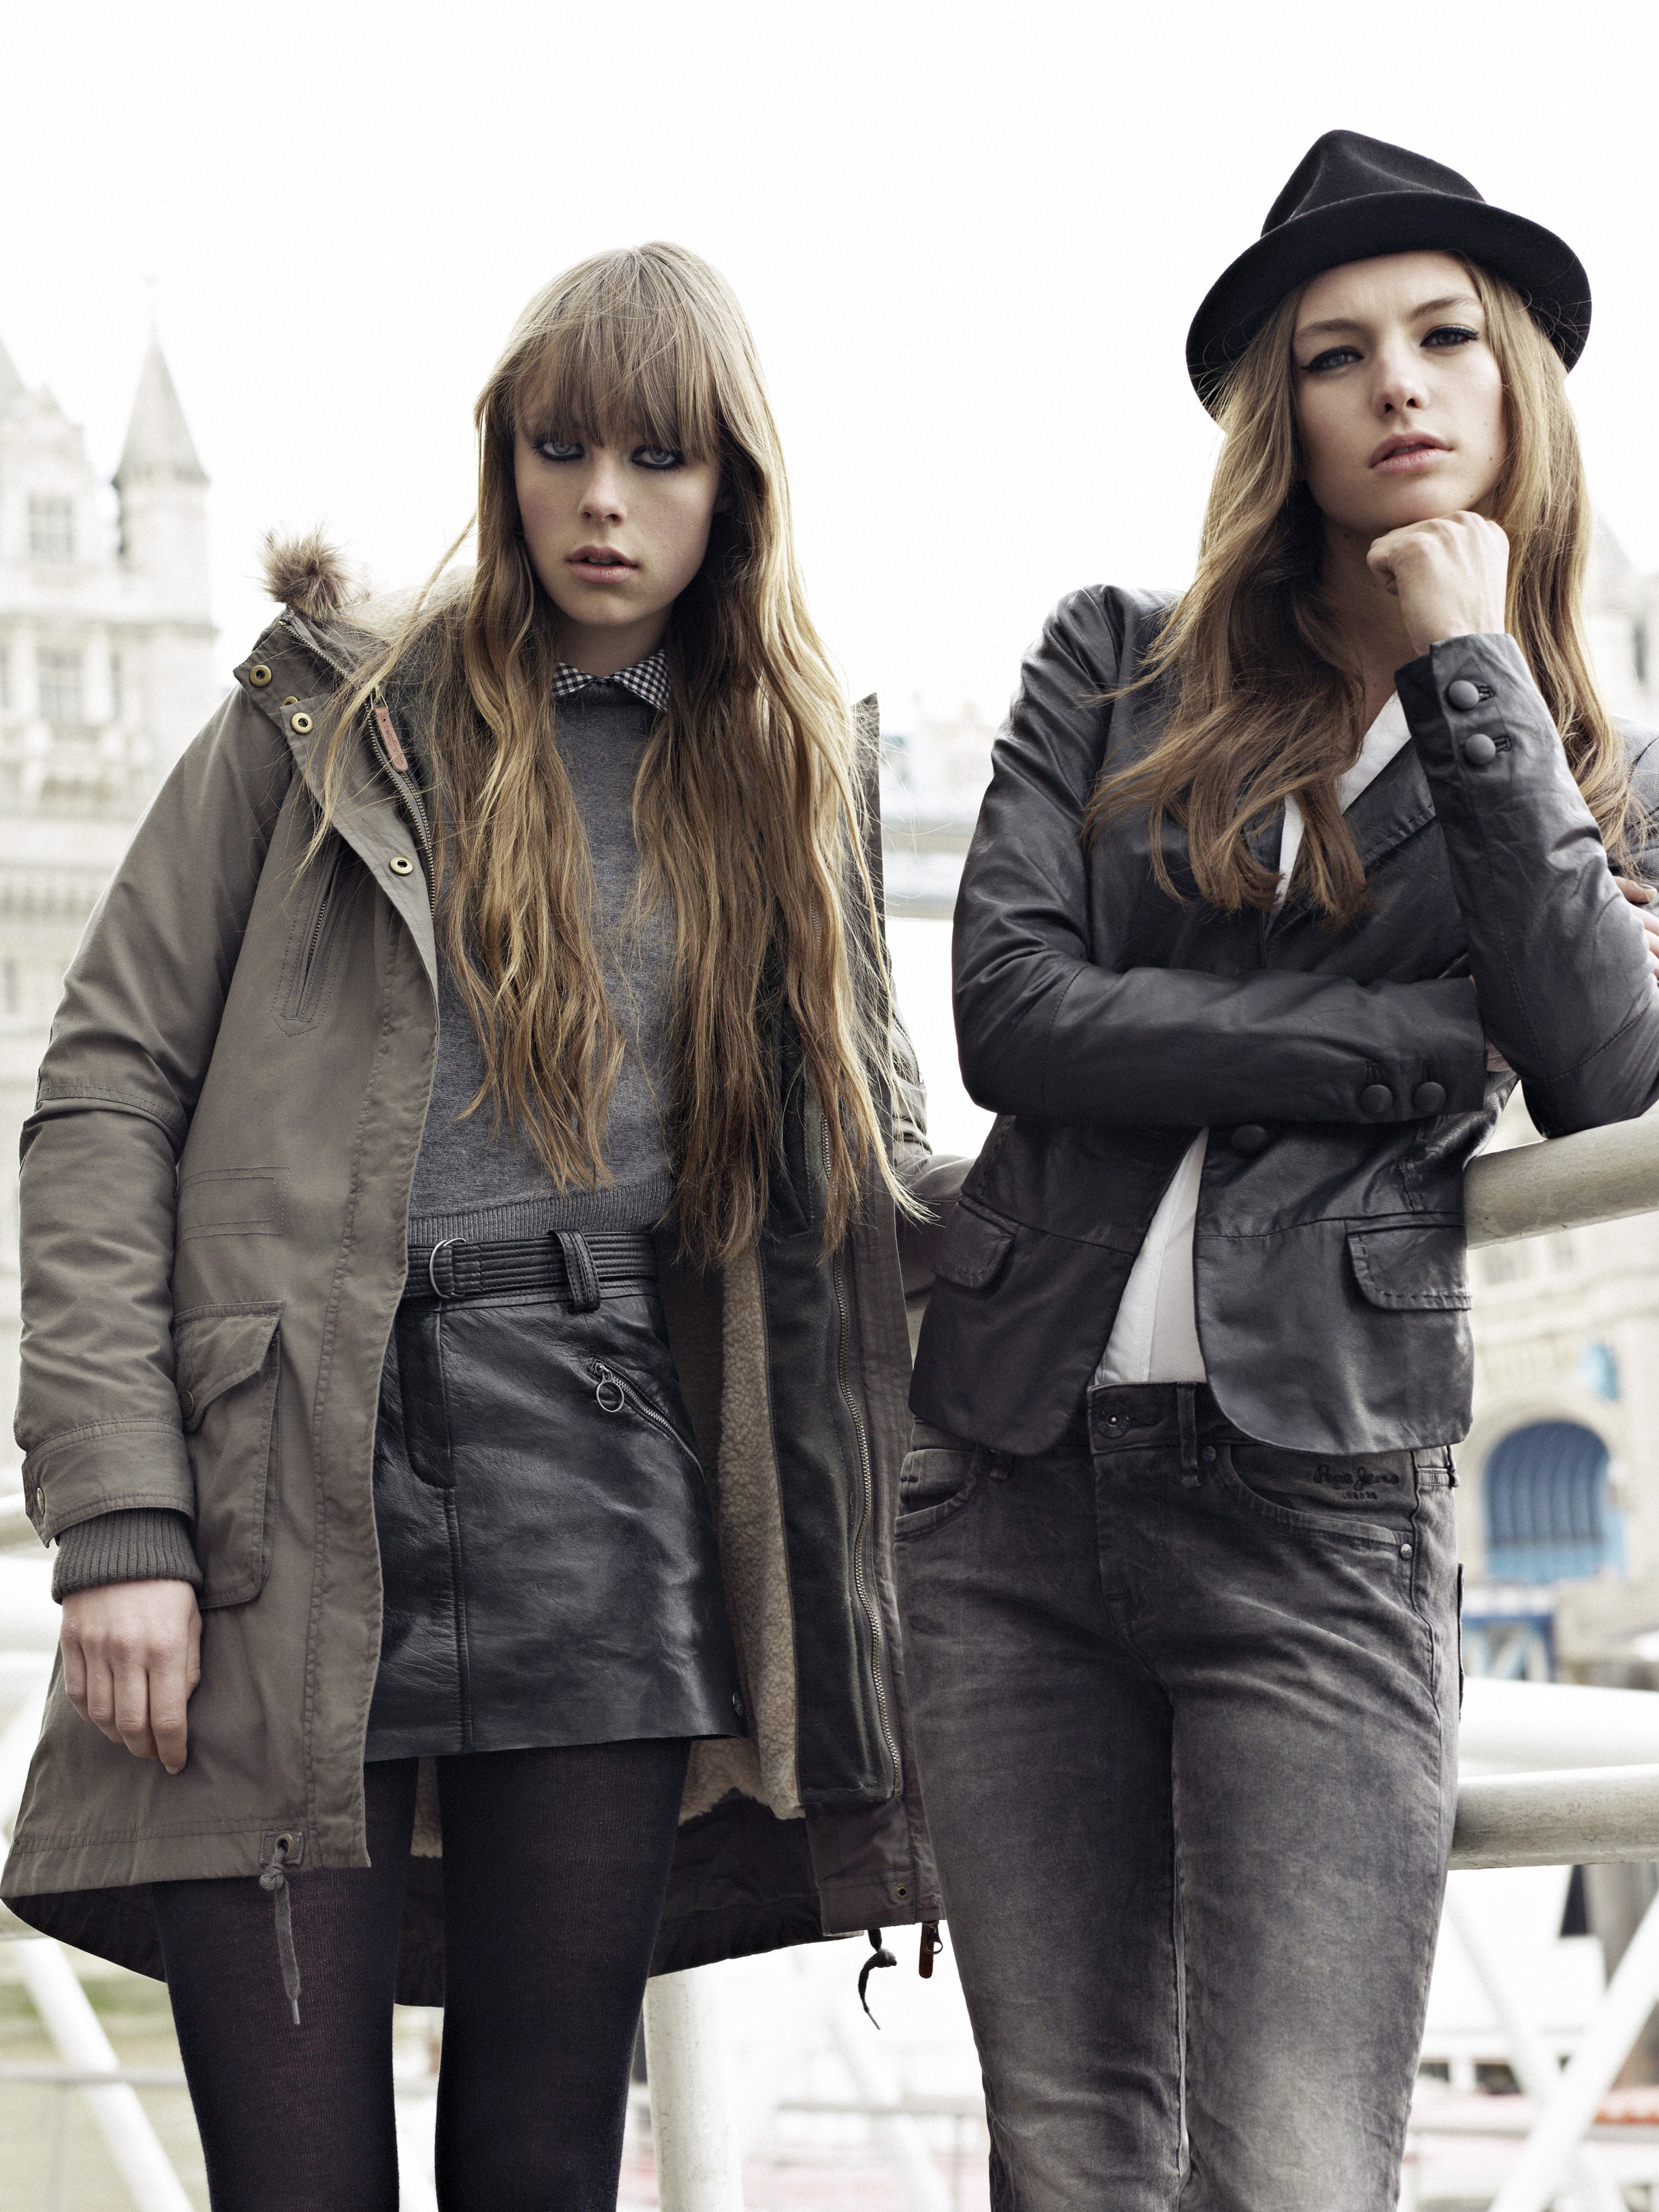 Pepe Jeans AW 2012 Ad Campaign 8